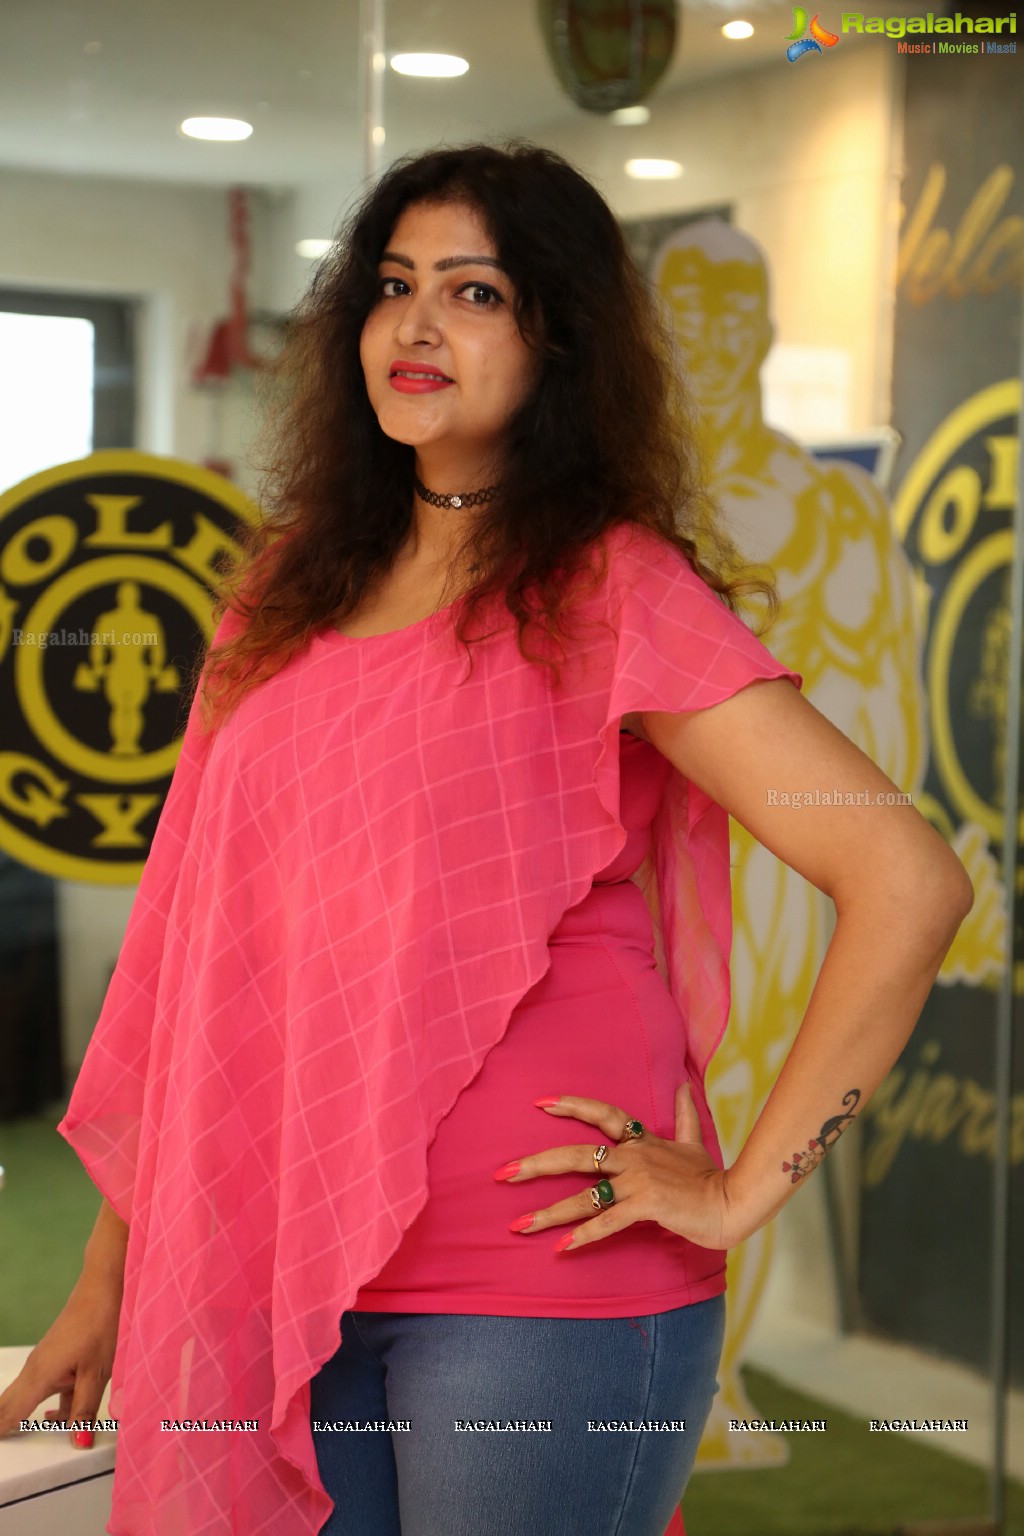 Pink Ribbon - Breast Cancer Awareness Day Event by Phankar Innovative Minds at Golds Gym